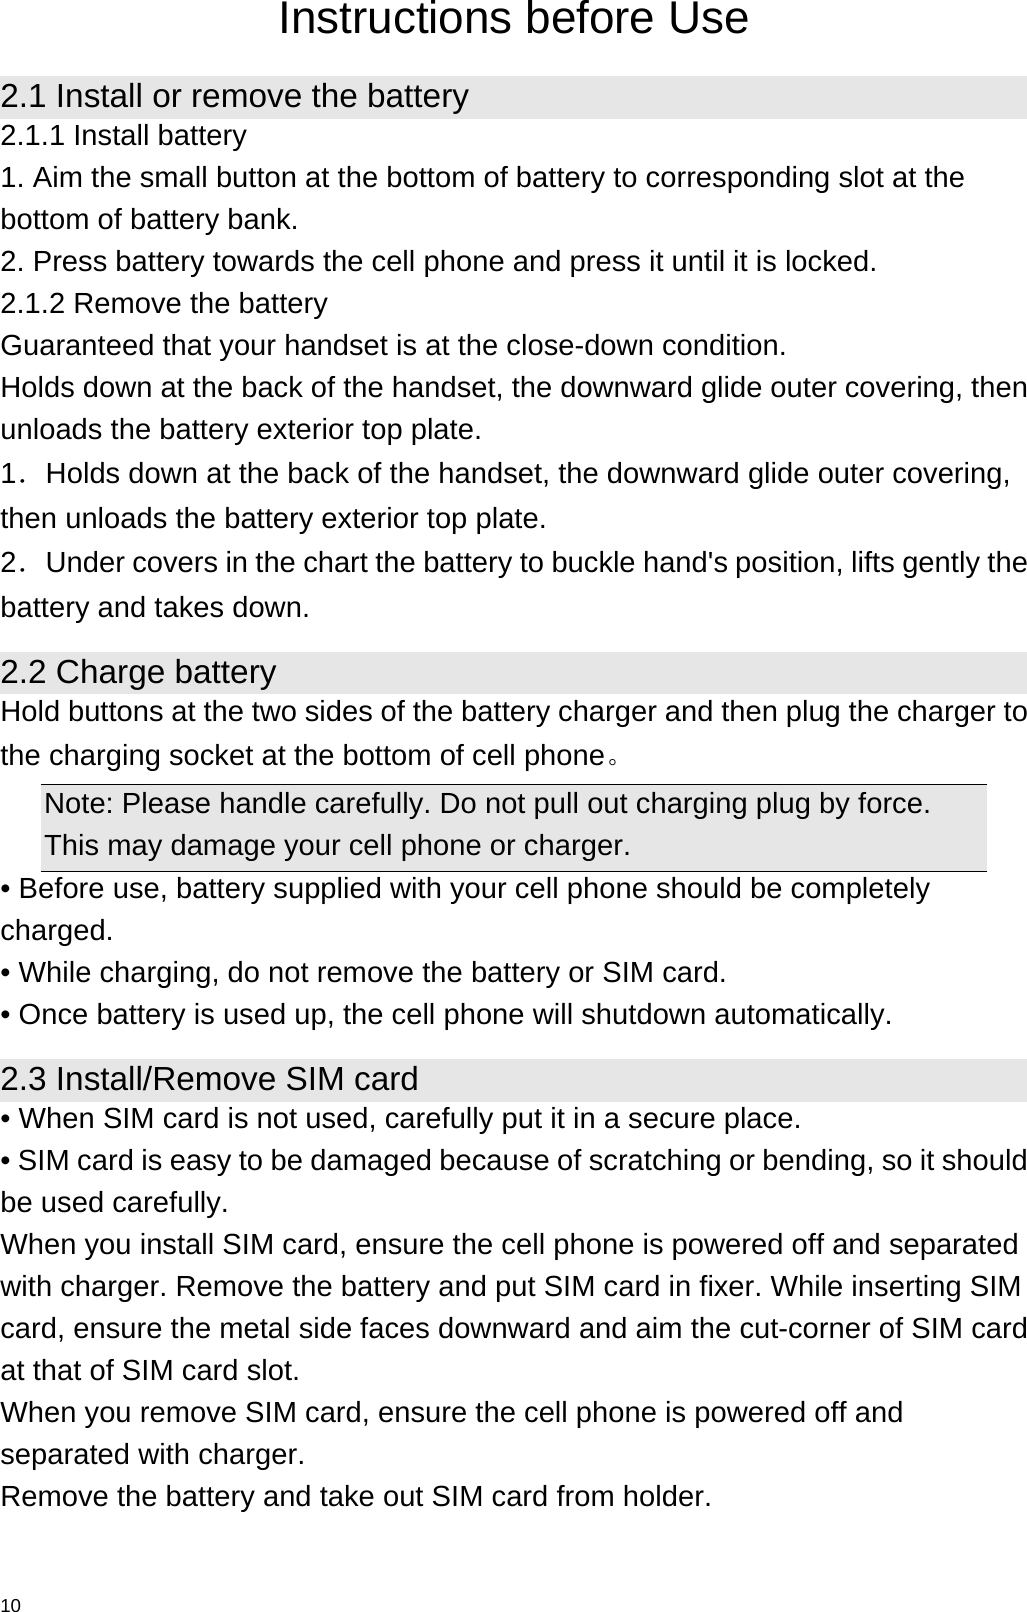   10 Instructions before Use 2.1 Install or remove the battery 2.1.1 Install battery 1. Aim the small button at the bottom of battery to corresponding slot at the bottom of battery bank. 2. Press battery towards the cell phone and press it until it is locked. 2.1.2 Remove the battery Guaranteed that your handset is at the close-down condition. Holds down at the back of the handset, the downward glide outer covering, then unloads the battery exterior top plate. 1．Holds down at the back of the handset, the downward glide outer covering, then unloads the battery exterior top plate. 2．Under covers in the chart the battery to buckle hand&apos;s position, lifts gently the battery and takes down. 2.2 Charge battery Hold buttons at the two sides of the battery charger and then plug the charger to the charging socket at the bottom of cell phone。  Note: Please handle carefully. Do not pull out charging plug by force. This may damage your cell phone or charger. • Before use, battery supplied with your cell phone should be completely charged. • While charging, do not remove the battery or SIM card. • Once battery is used up, the cell phone will shutdown automatically. 2.3 Install/Remove SIM card • When SIM card is not used, carefully put it in a secure place. • SIM card is easy to be damaged because of scratching or bending, so it should be used carefully. When you install SIM card, ensure the cell phone is powered off and separated with charger. Remove the battery and put SIM card in fixer. While inserting SIM card, ensure the metal side faces downward and aim the cut-corner of SIM card at that of SIM card slot. When you remove SIM card, ensure the cell phone is powered off and separated with charger. Remove the battery and take out SIM card from holder. 